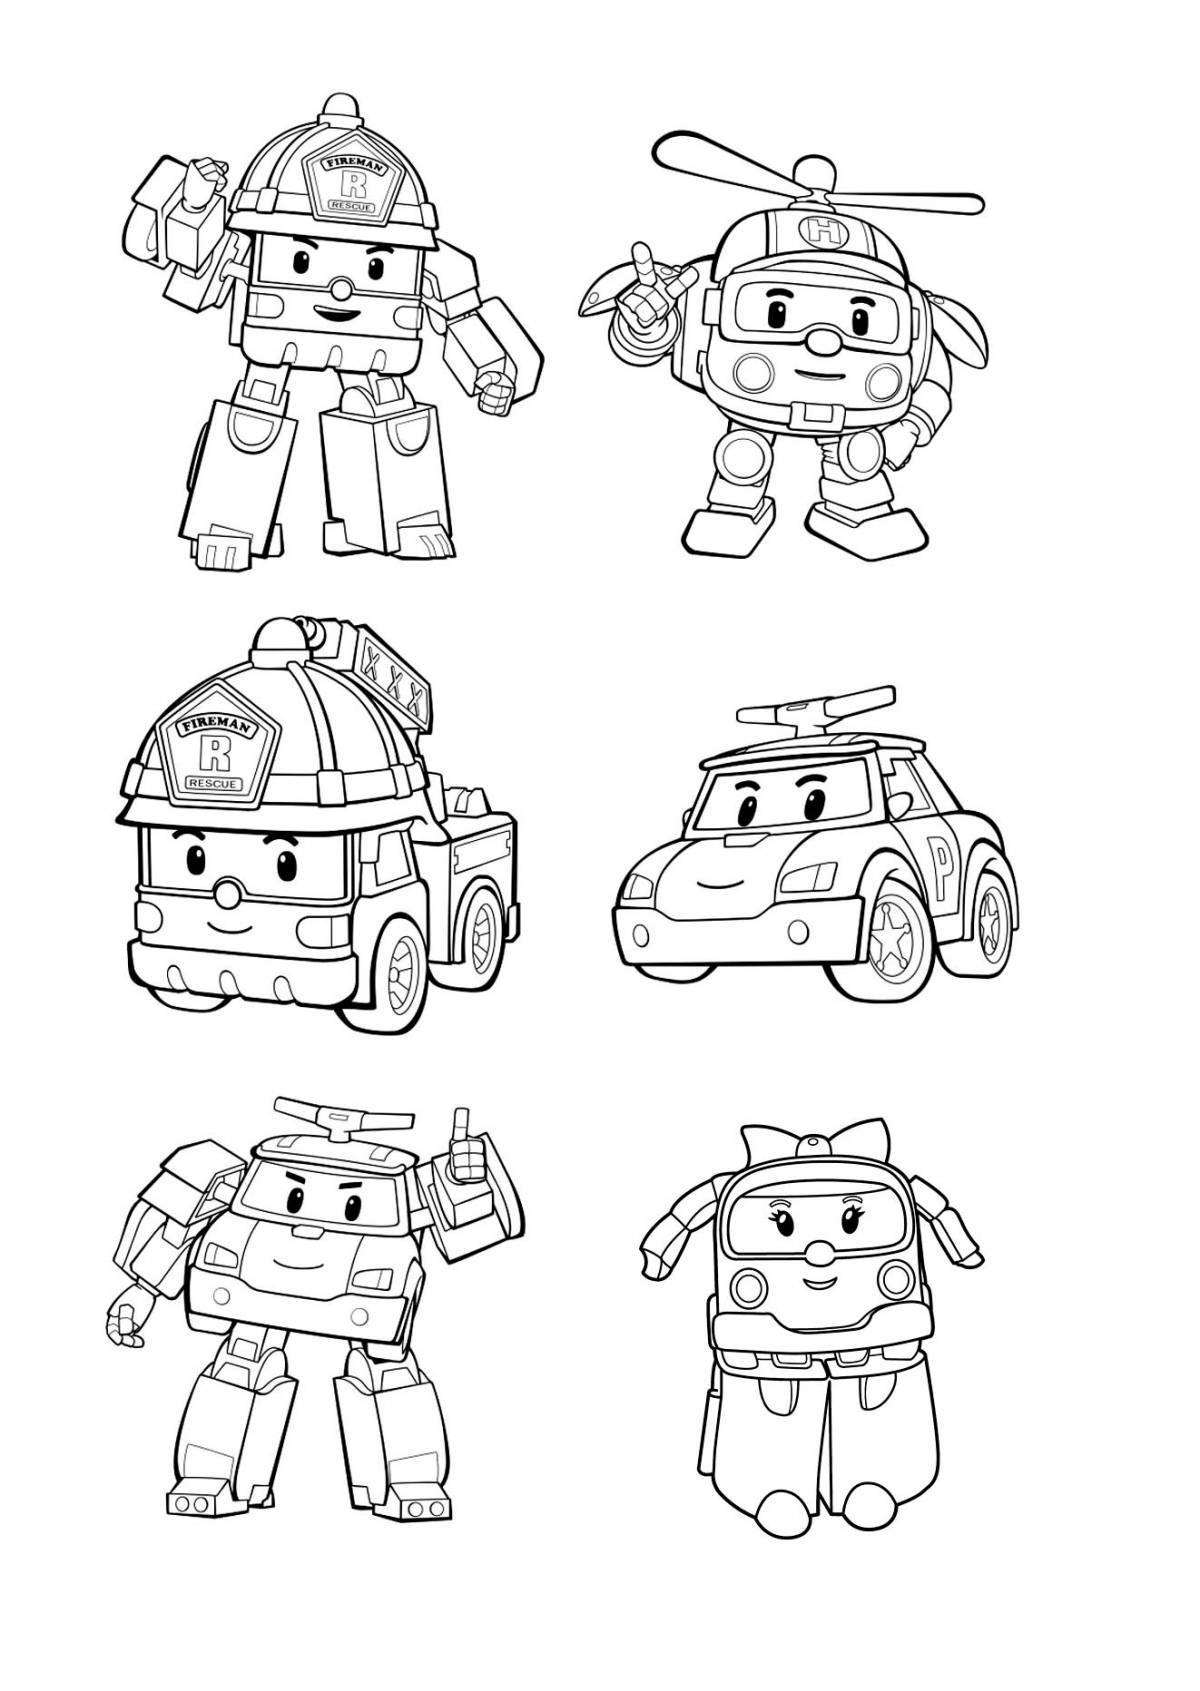 Robocar poli coloring page with colorful splashes